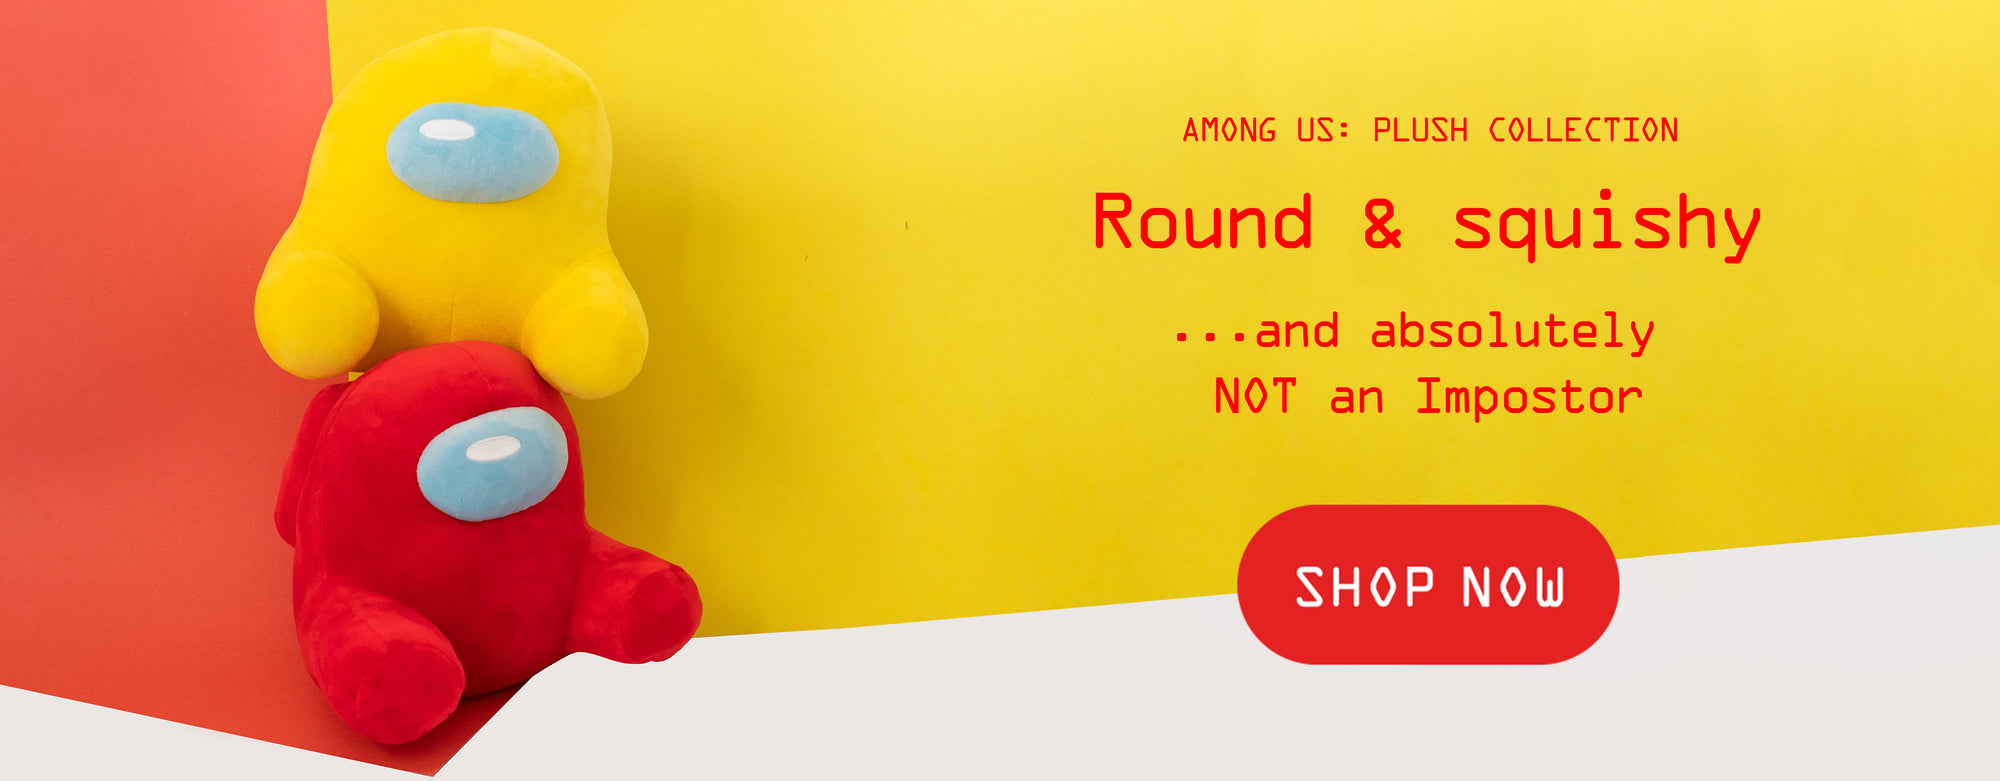 A yellow and red Impostor plush stacked on top of each other. The banner reads "Among Us: Plush Collection. Round & squishy... and absolutely NOT an Impostor". A button under the text reads "Shop Now"